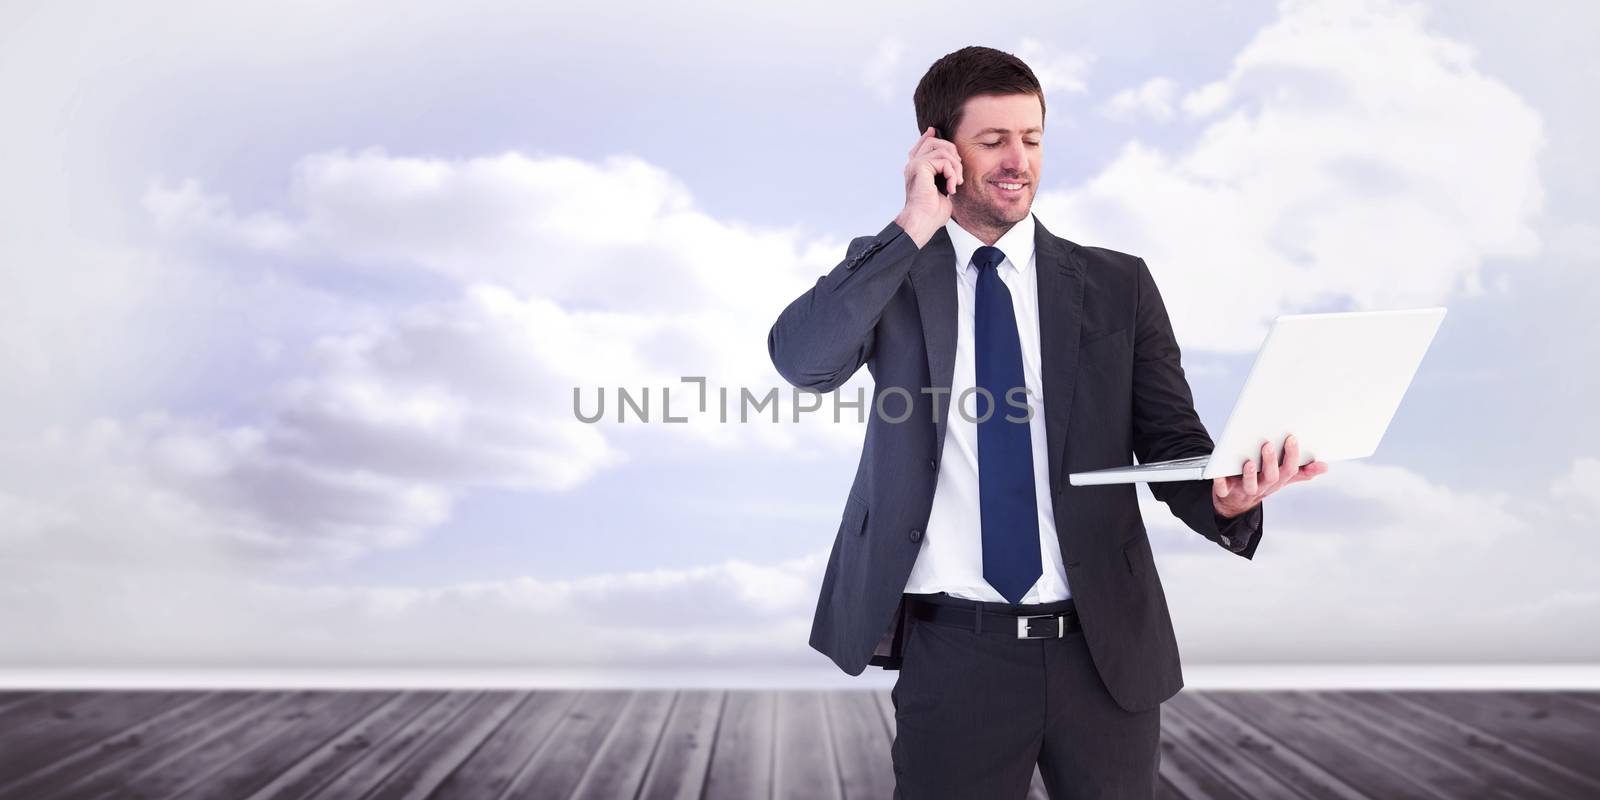 Businessman talking on phone holding laptop against clouds in a room